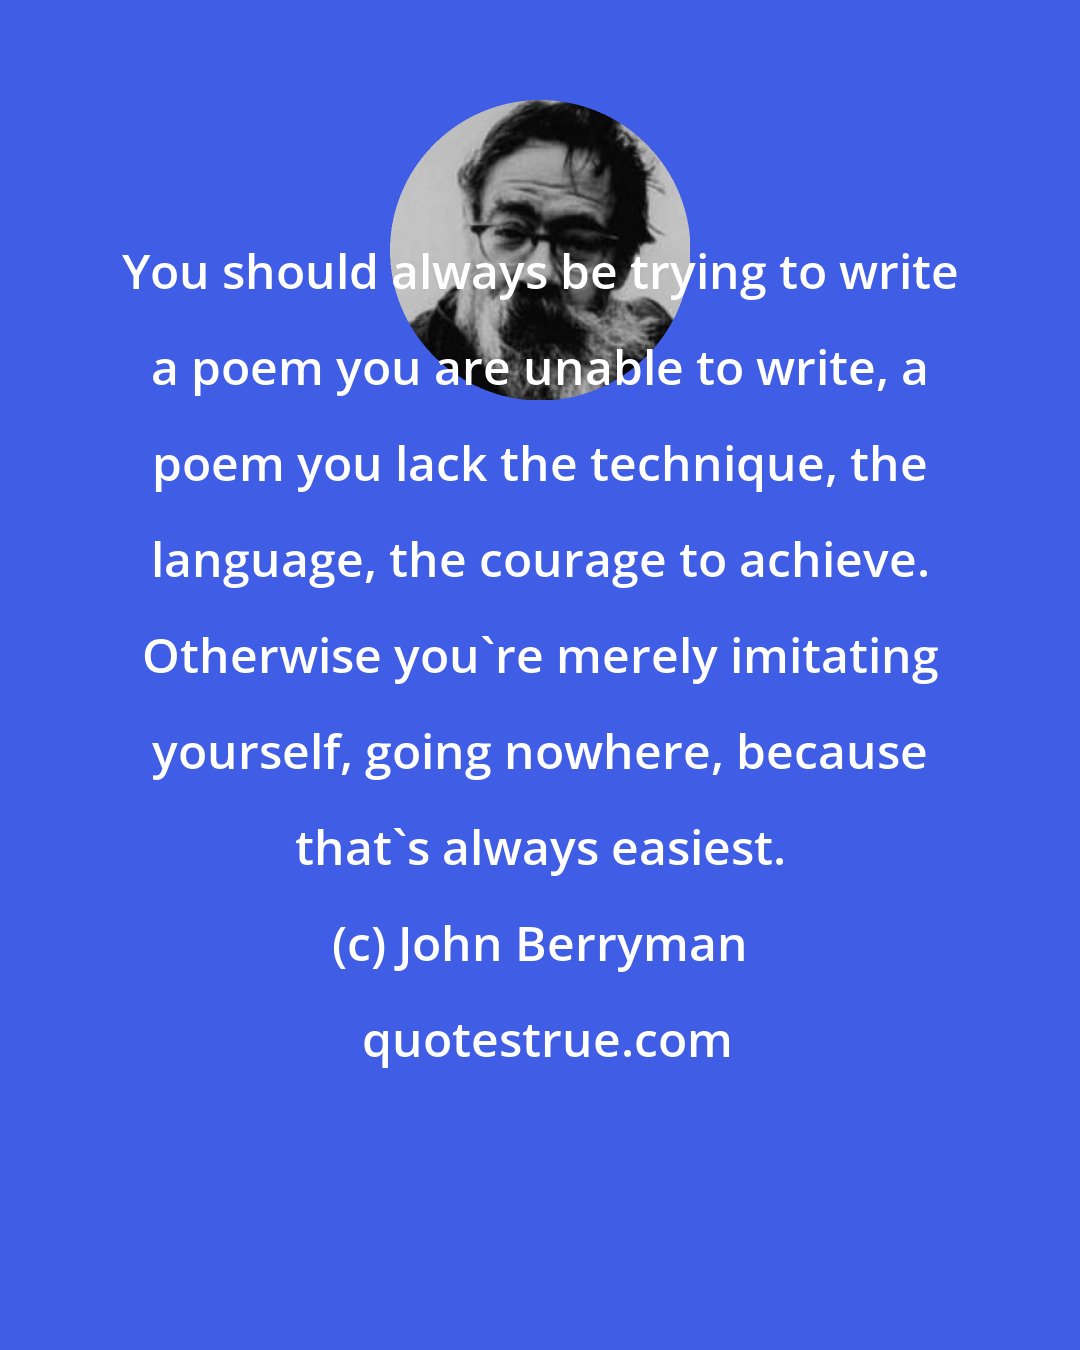 John Berryman: You should always be trying to write a poem you are unable to write, a poem you lack the technique, the language, the courage to achieve. Otherwise you're merely imitating yourself, going nowhere, because that's always easiest.